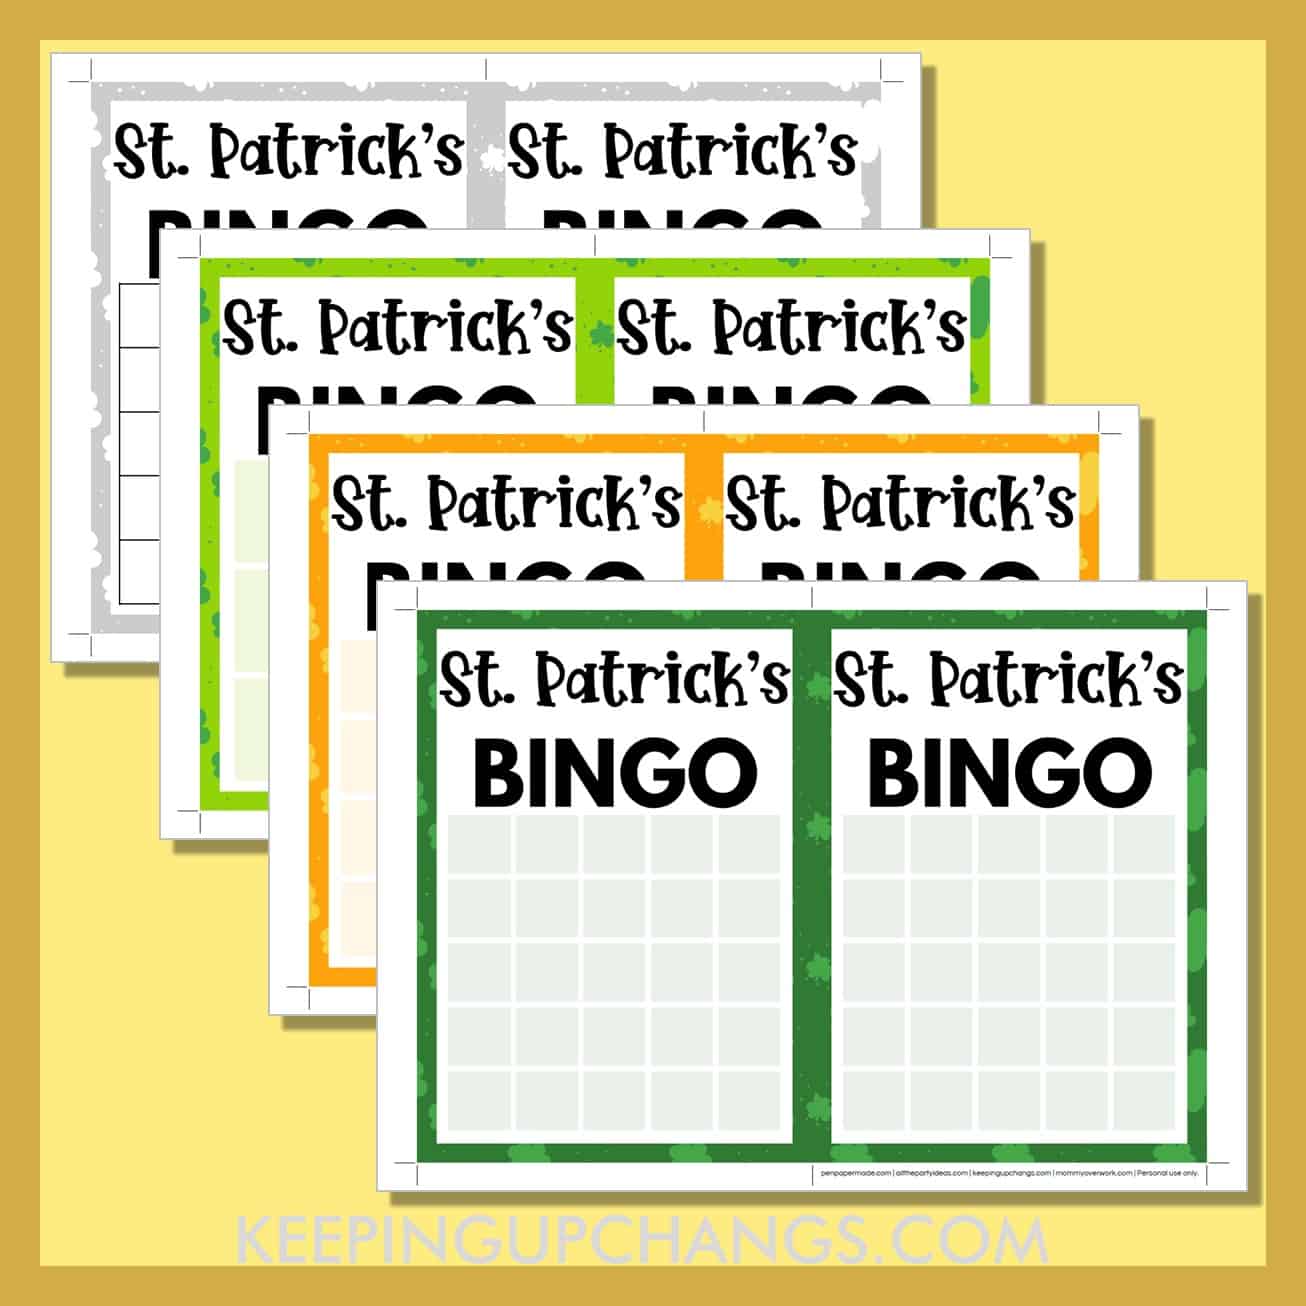 free blank st patrick's day bingo card printable templates in 3x3, 4x4 and 5x5 grids.